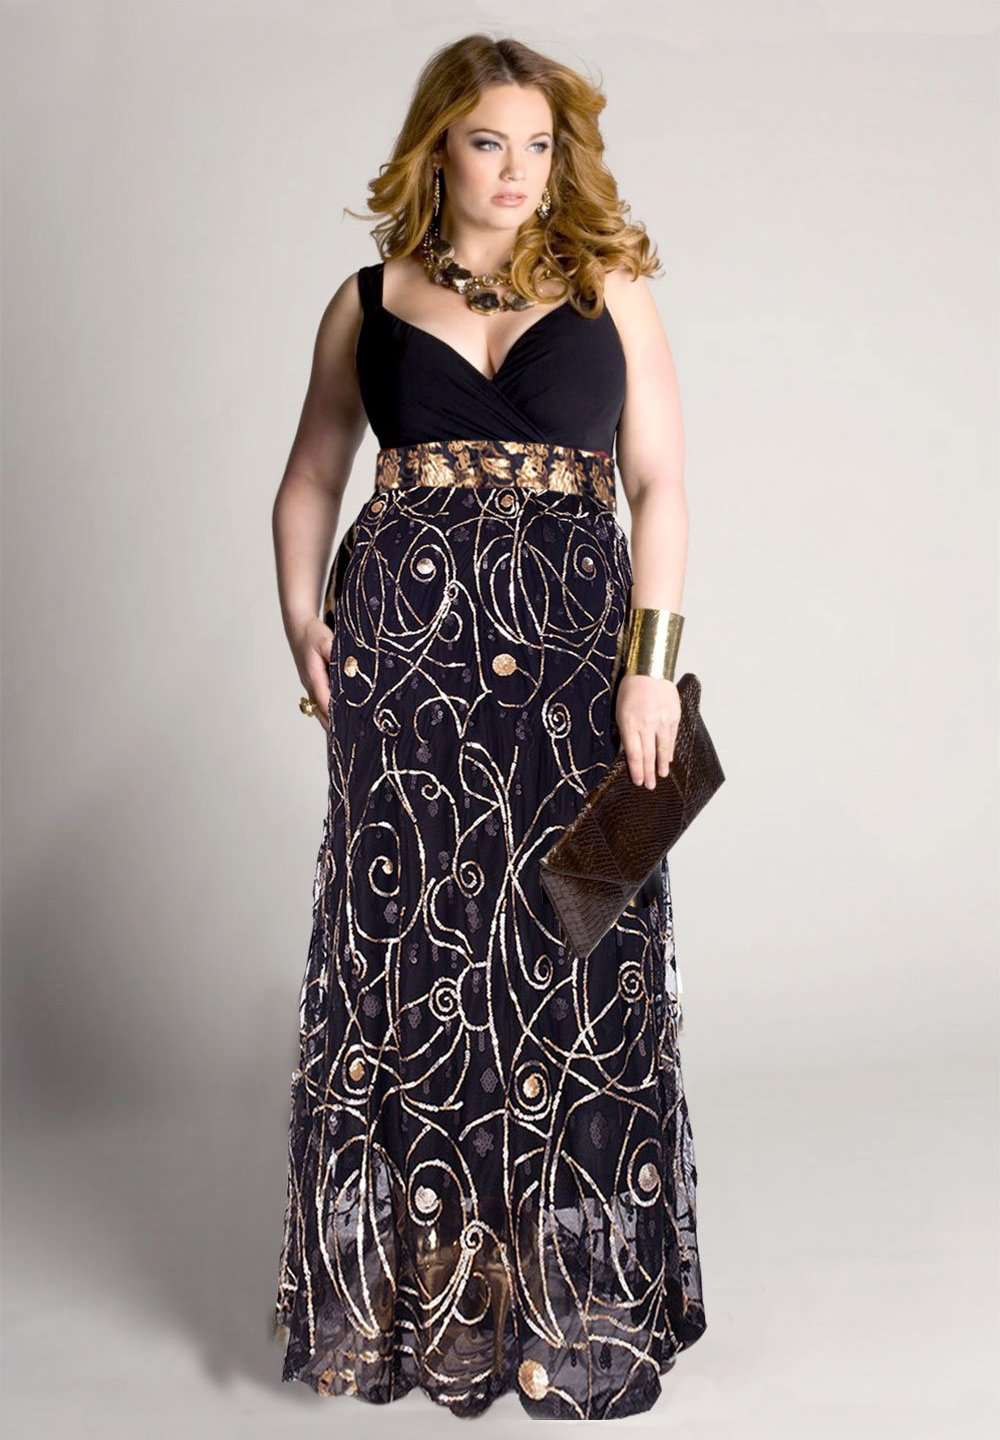 black and gold plus size dress